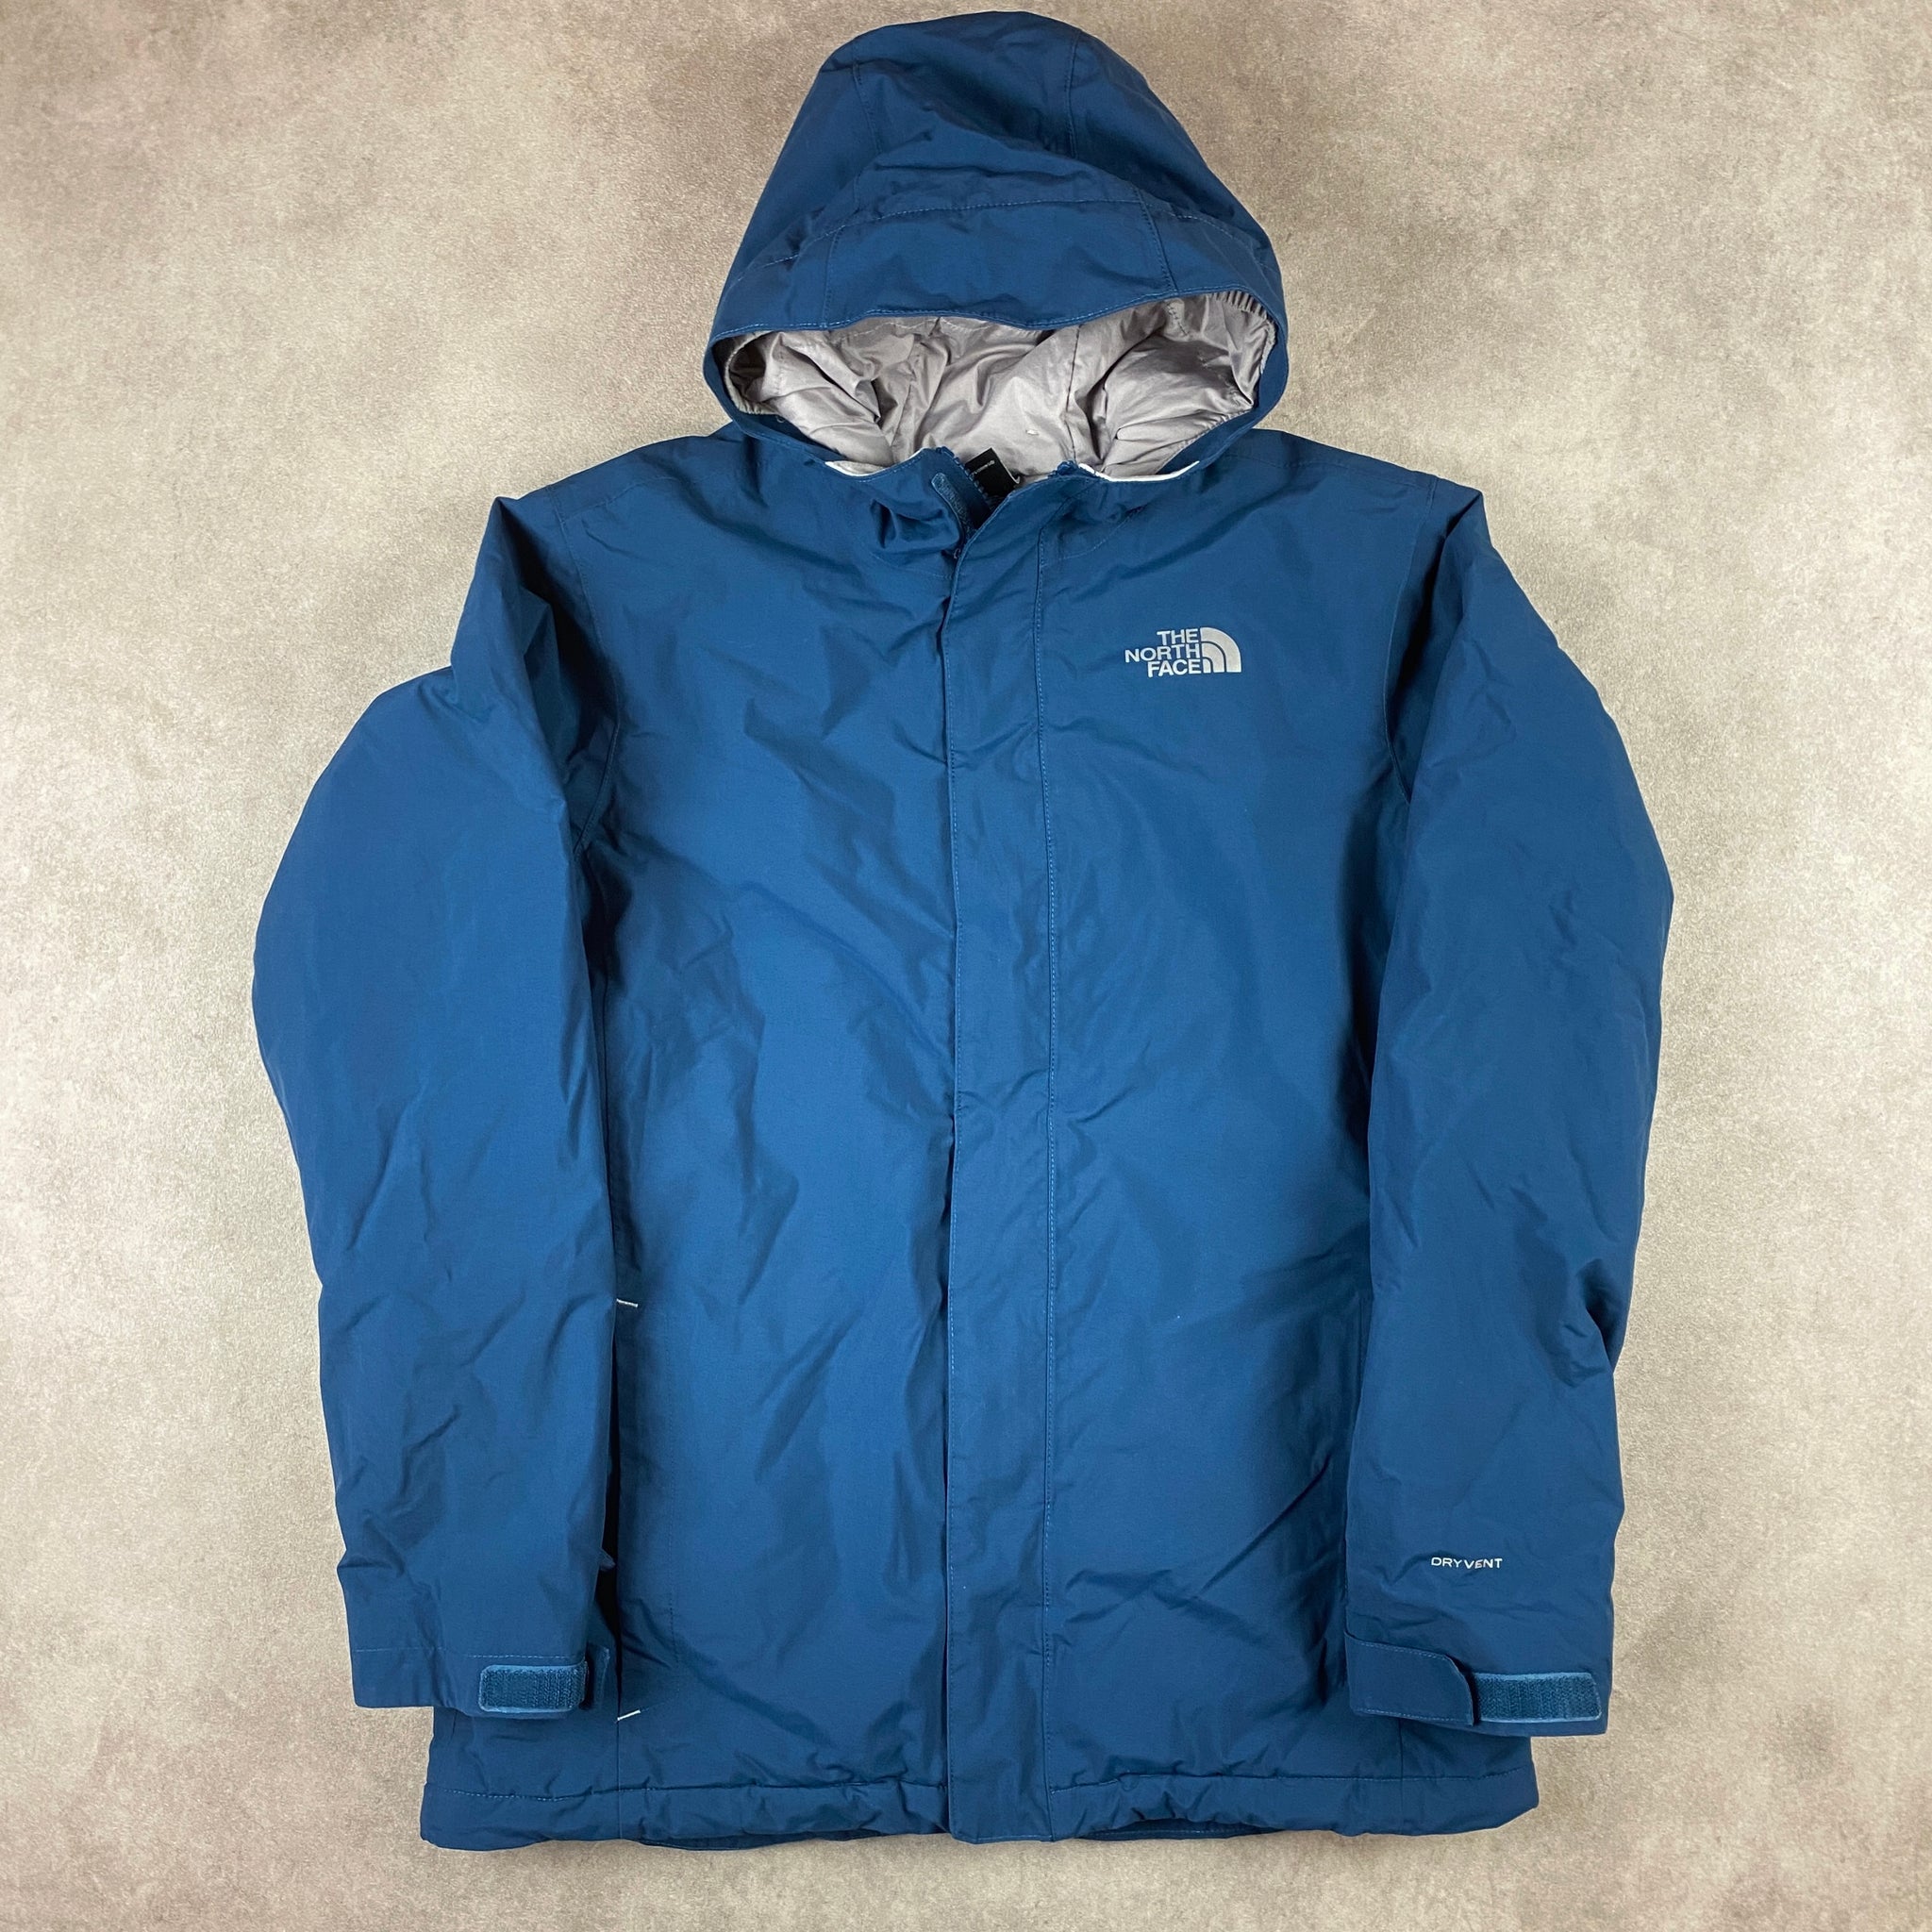 THE NORTH FACE JACKE (S)